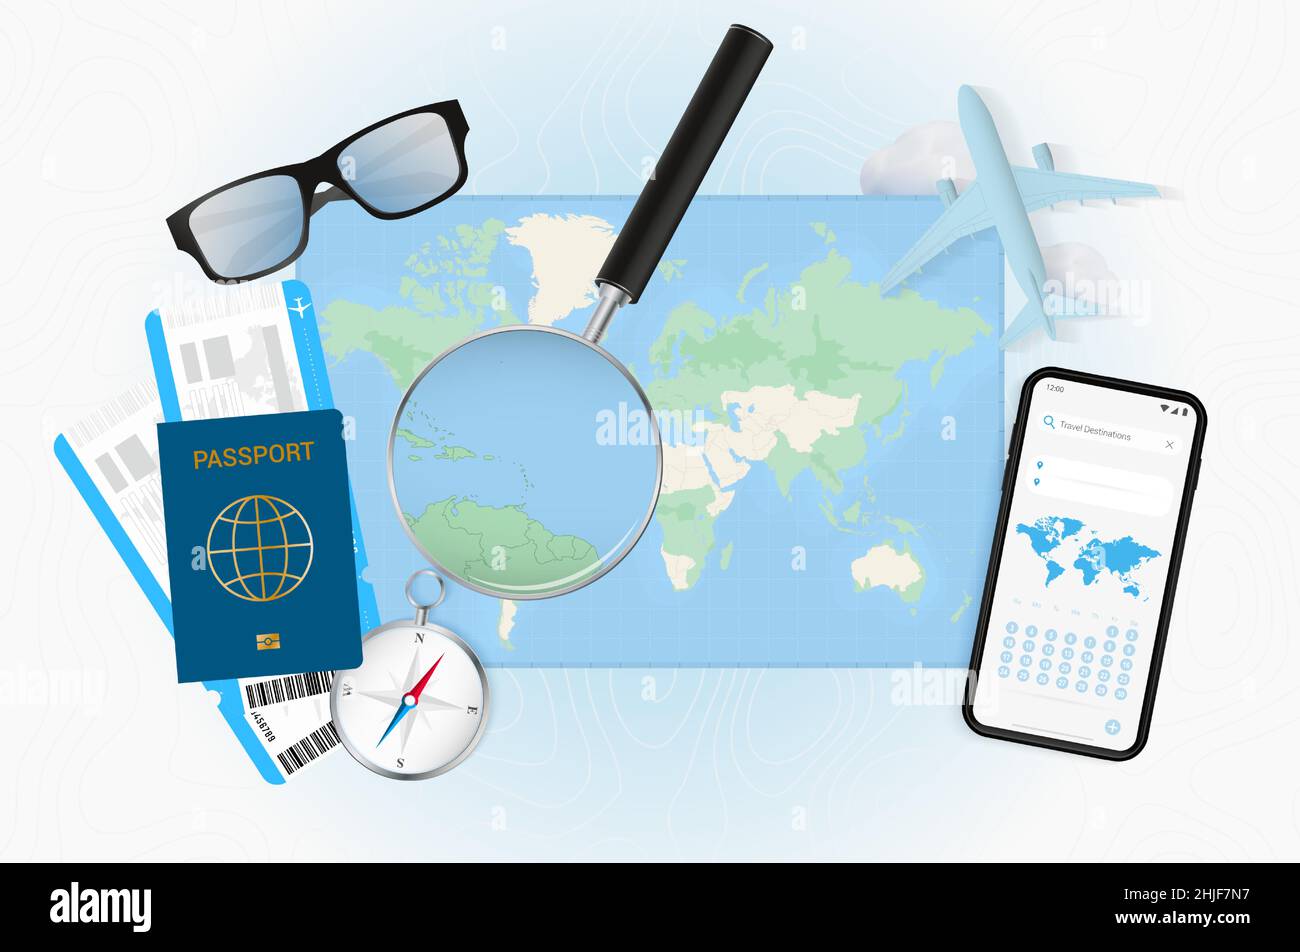 Conceptual illustration of a trip to Dominica with travel gear. World map with compass, passport, tickets, cell phone, plane and glass. Stock Vector